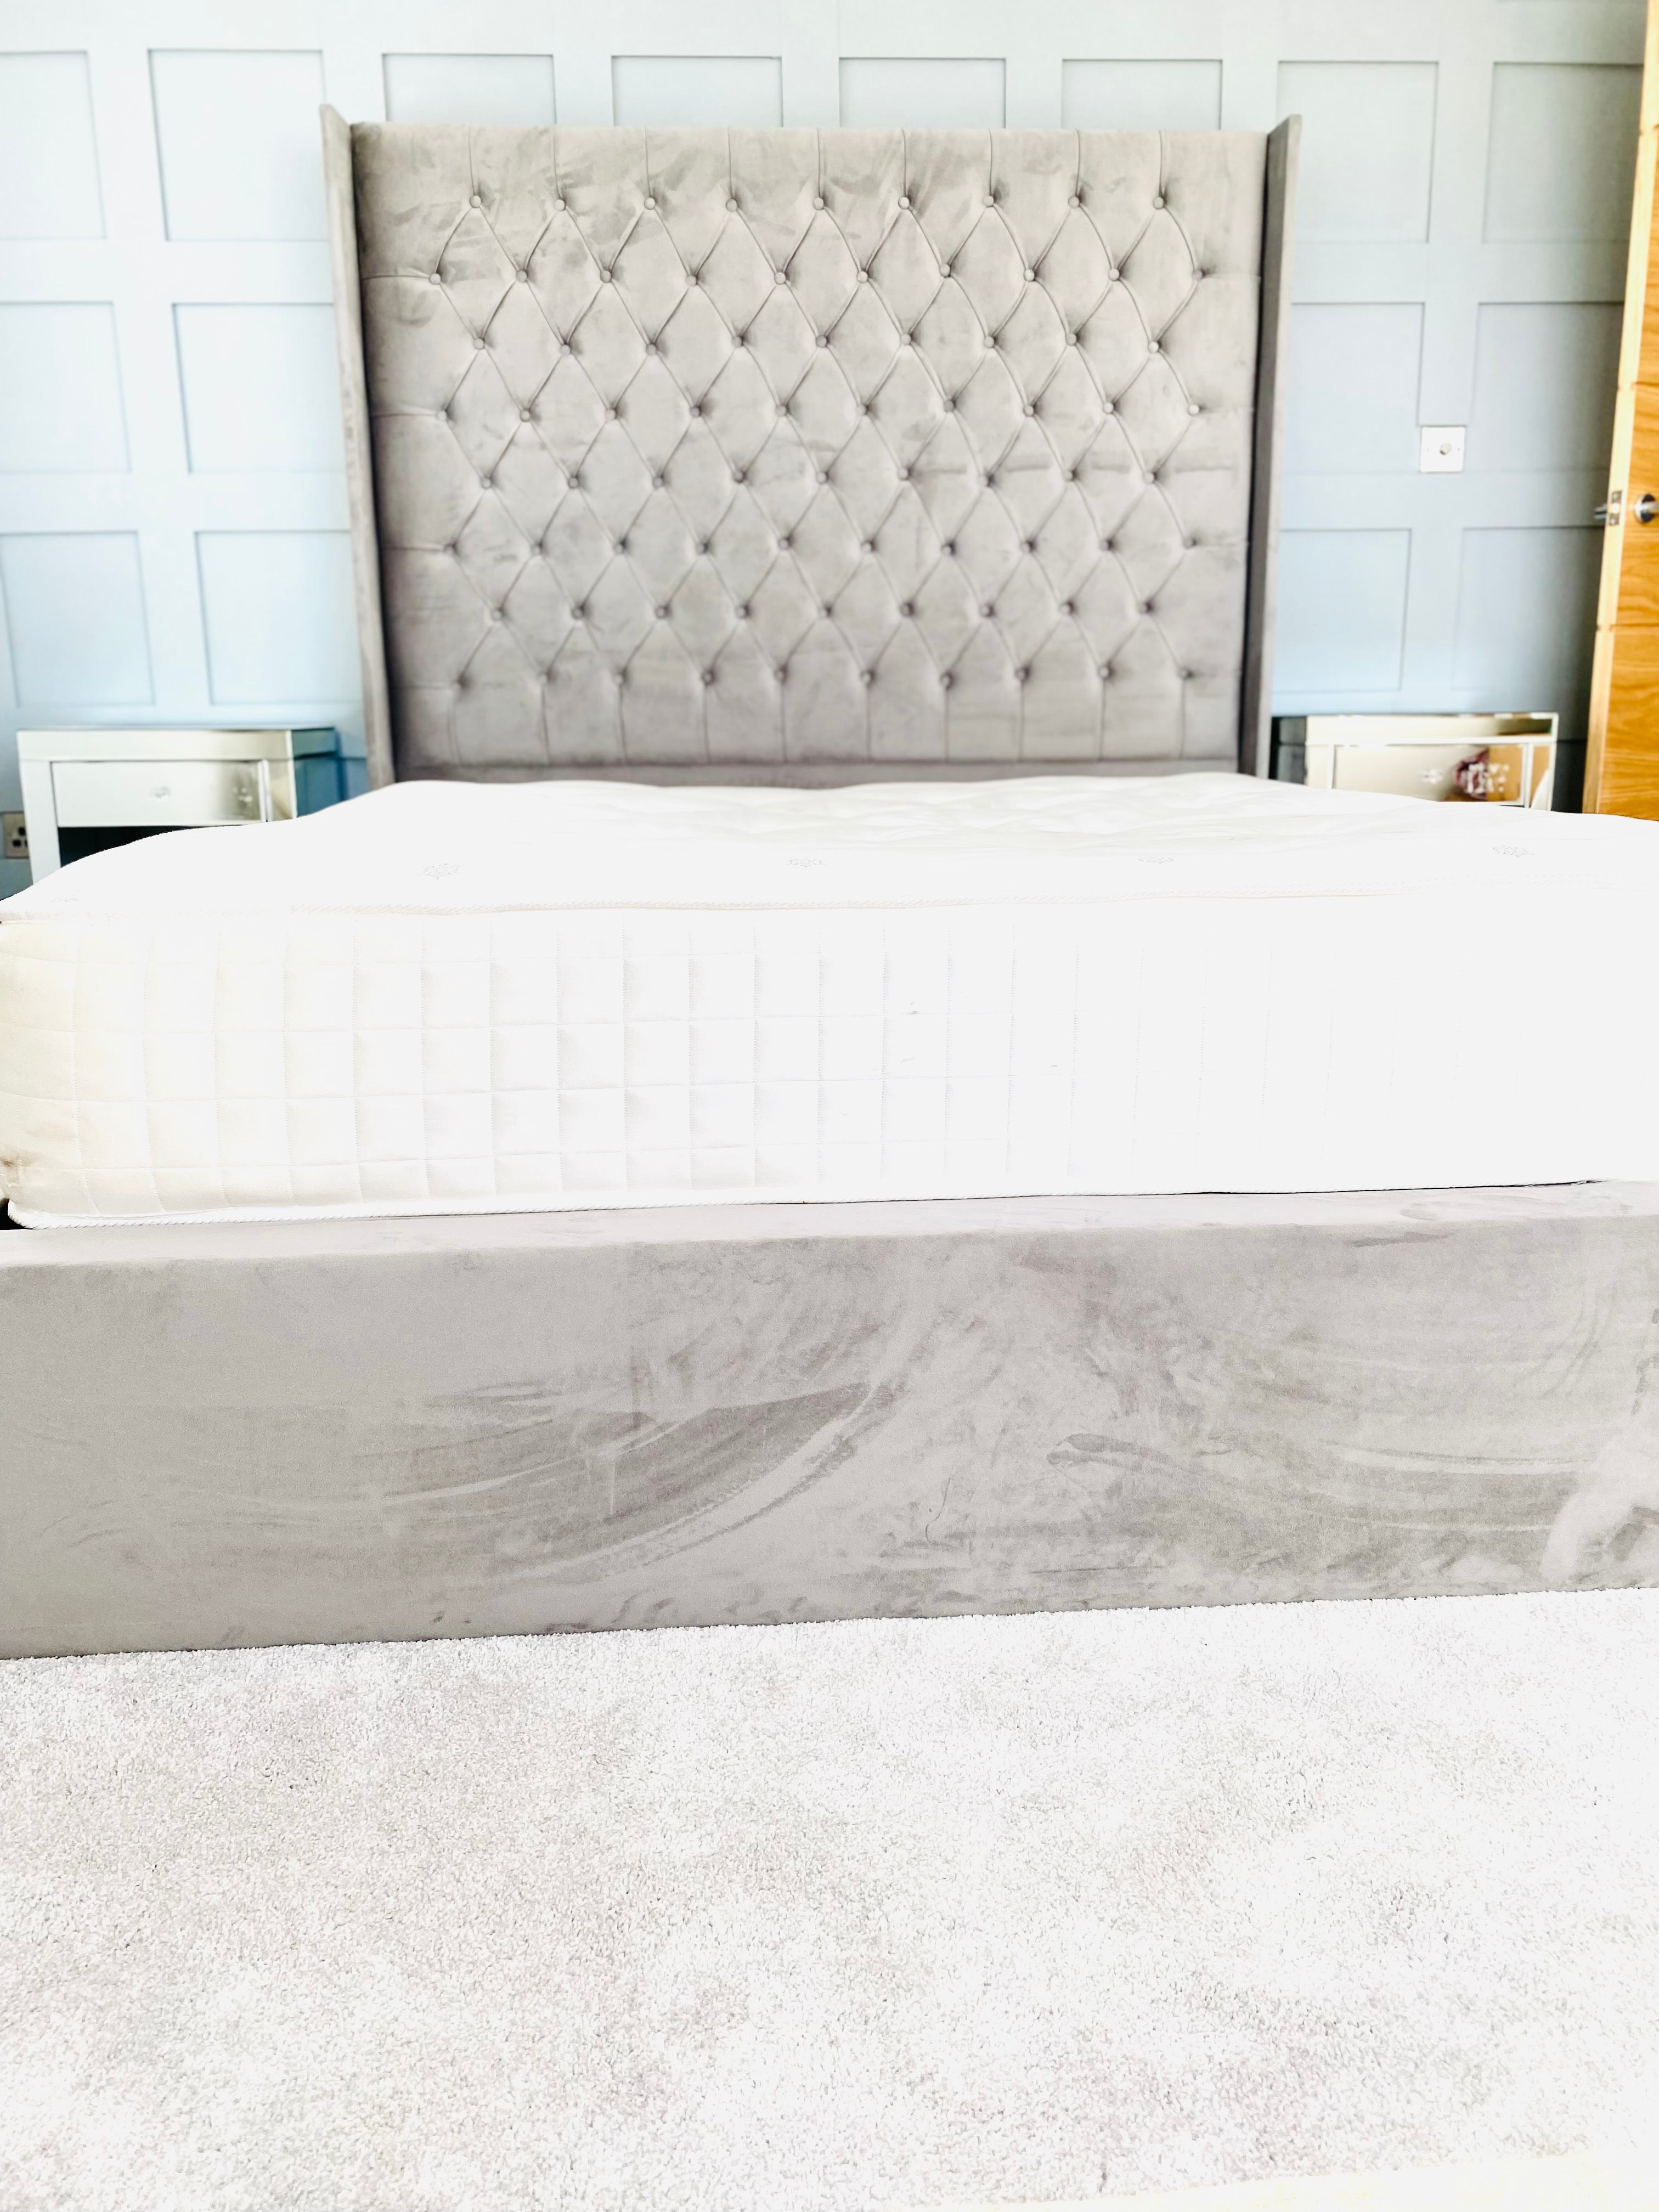 The Bespoke Chesterfield Wing Bed-Fully Customisable with Storage Options- Chesterfield Range